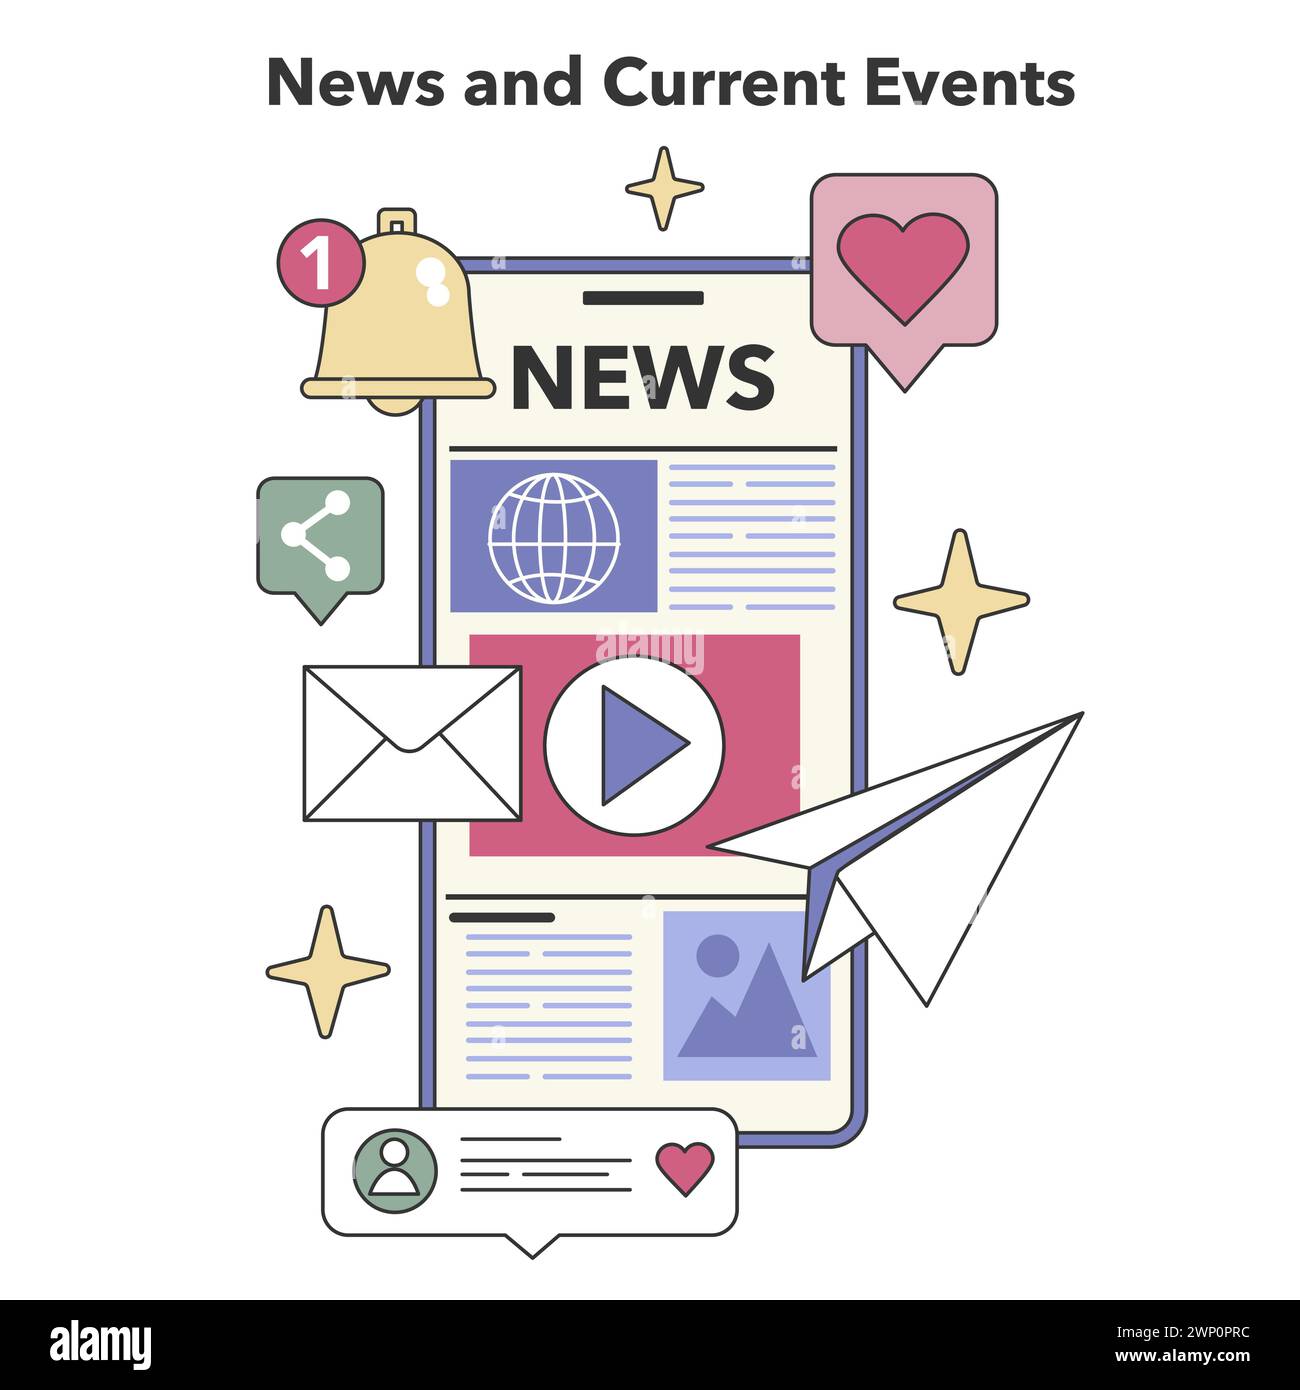 News and Current Events theme. Up-to-the-minute global updates and informative content streaming. World affairs, breaking news, informed society. Flat vector illustration Stock Vector